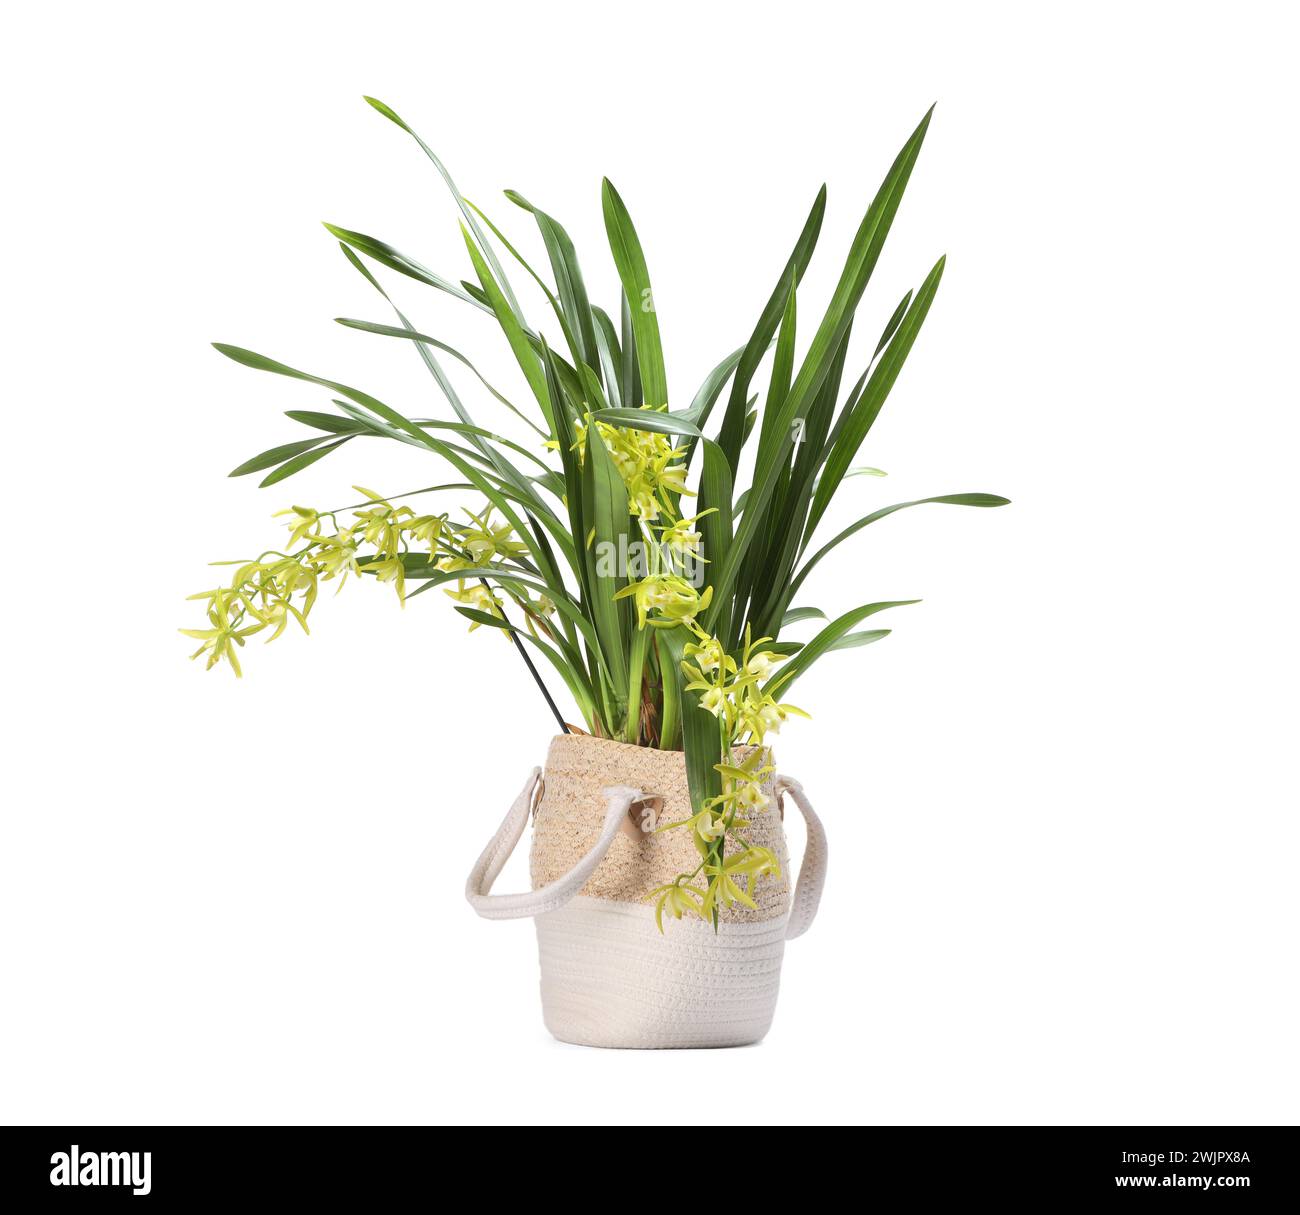 Vanilla orchid plant with yellow flowers in pot isolated on white Stock Photo